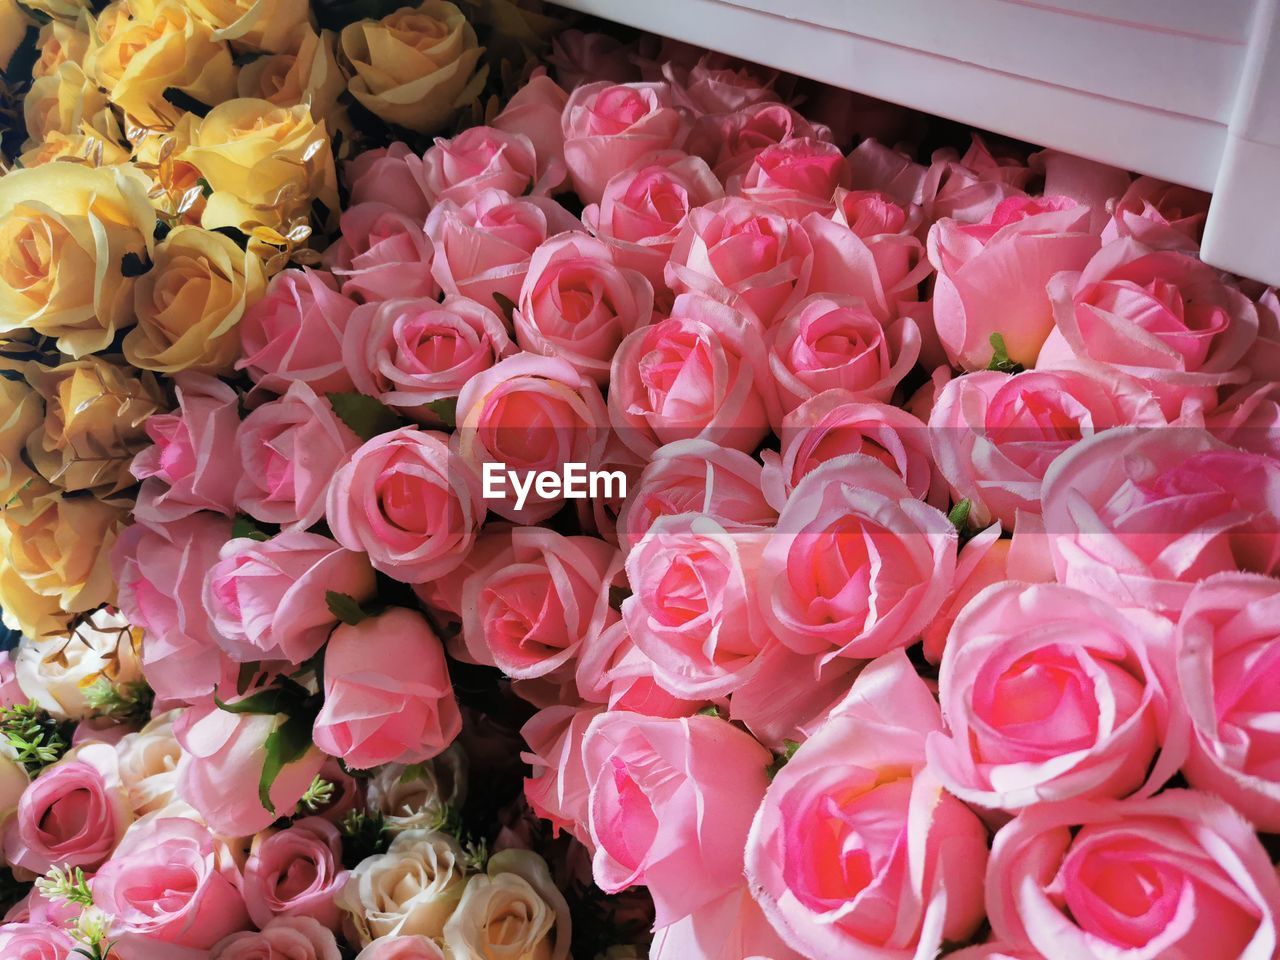 HIGH ANGLE VIEW OF PINK ROSES ON PLANT